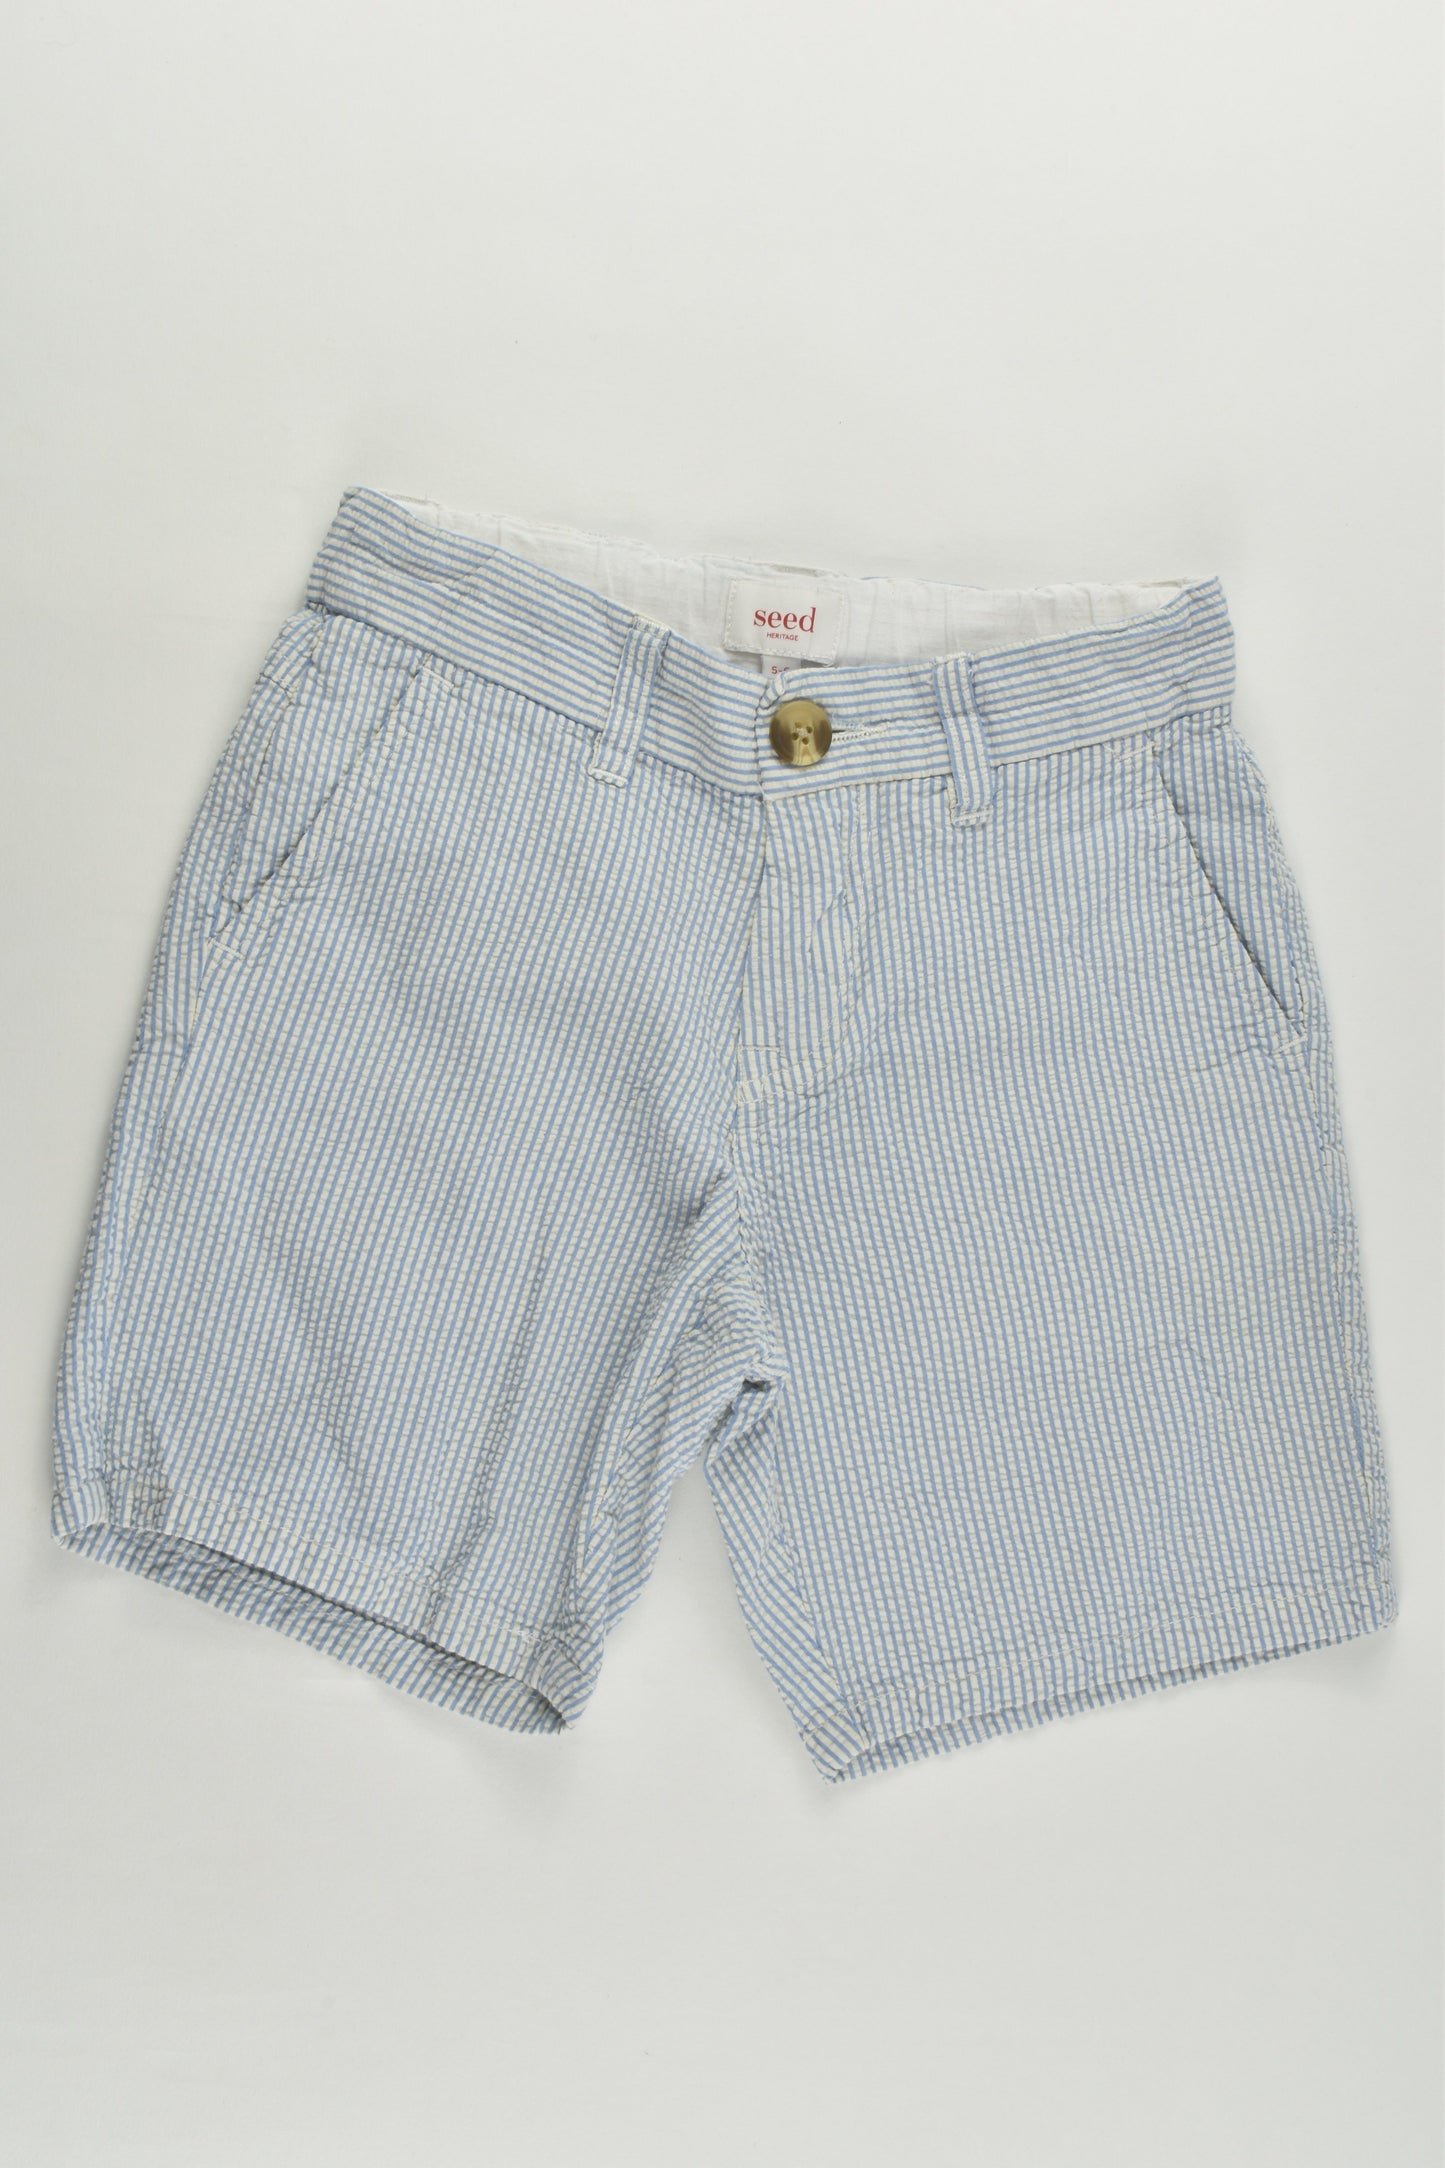 Seed Heritage Size 5-6 Striped Shorts